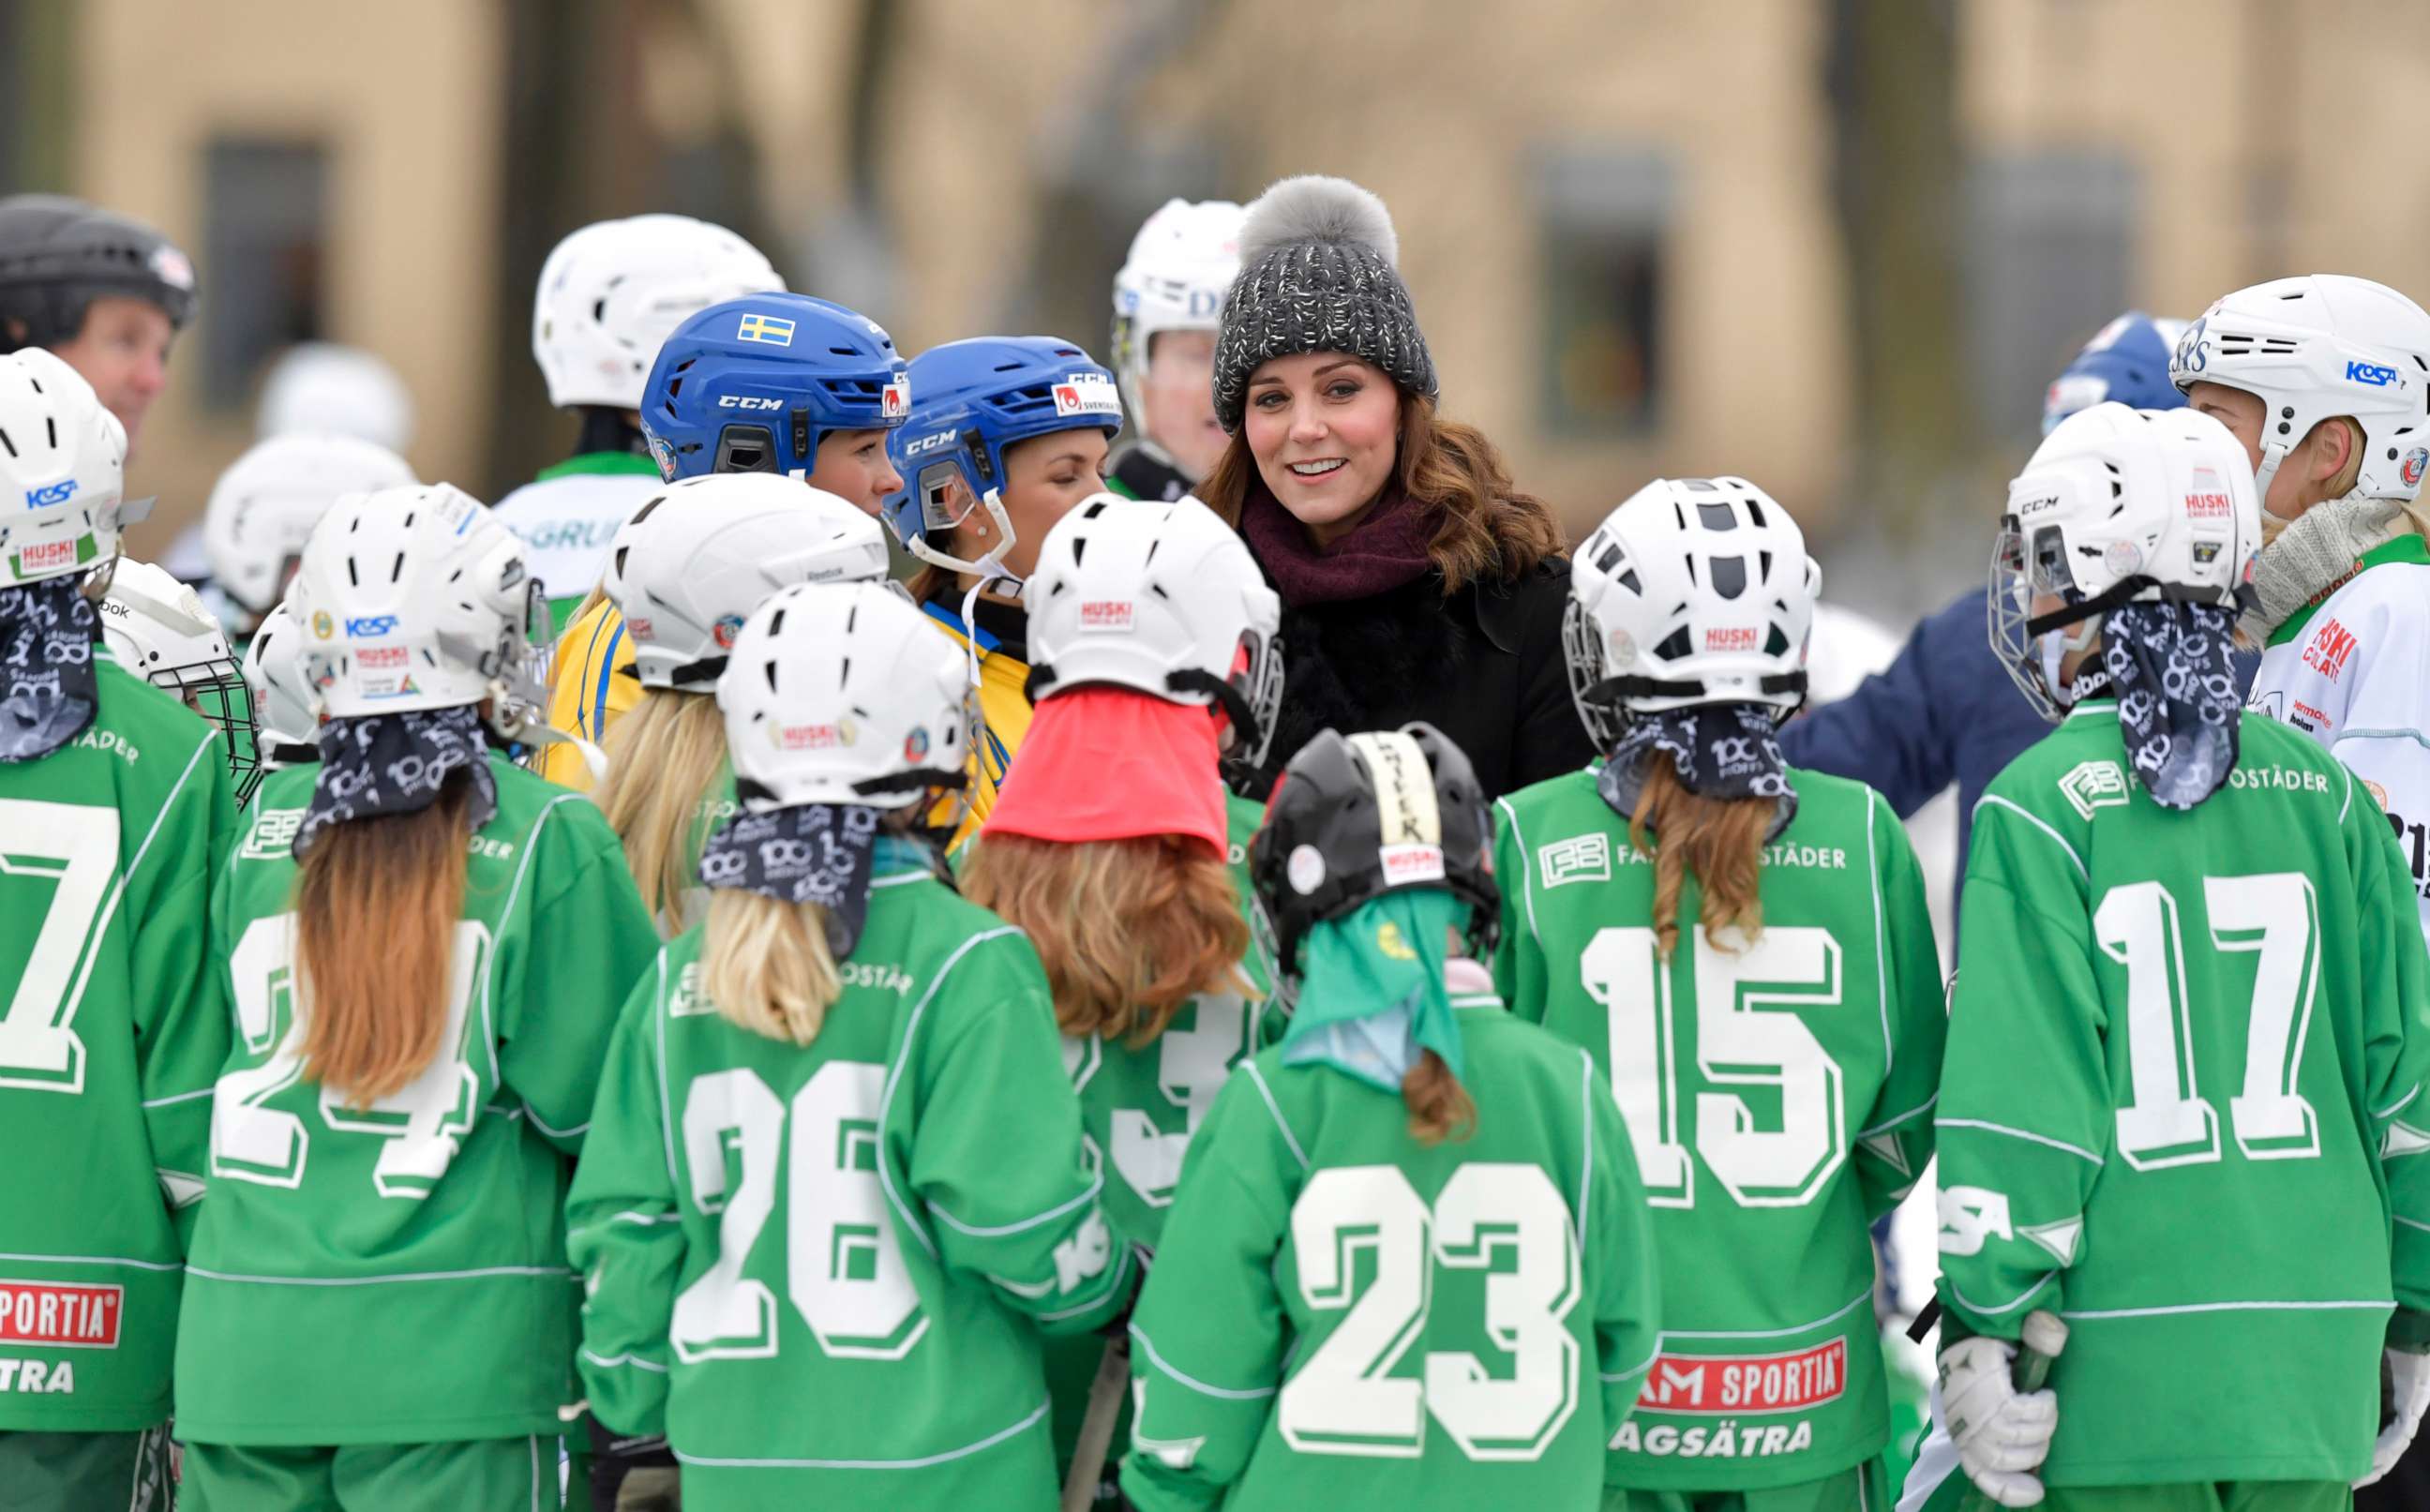 PHOTO: Britain's Kate, Duchess of Cambridge, speaks with young members of the Hammarby bandy sports club in Stockholm, Jan. 30, 2017, during Prince William and Duchess of Cambridge 4-day visit to Sweden and Norway.